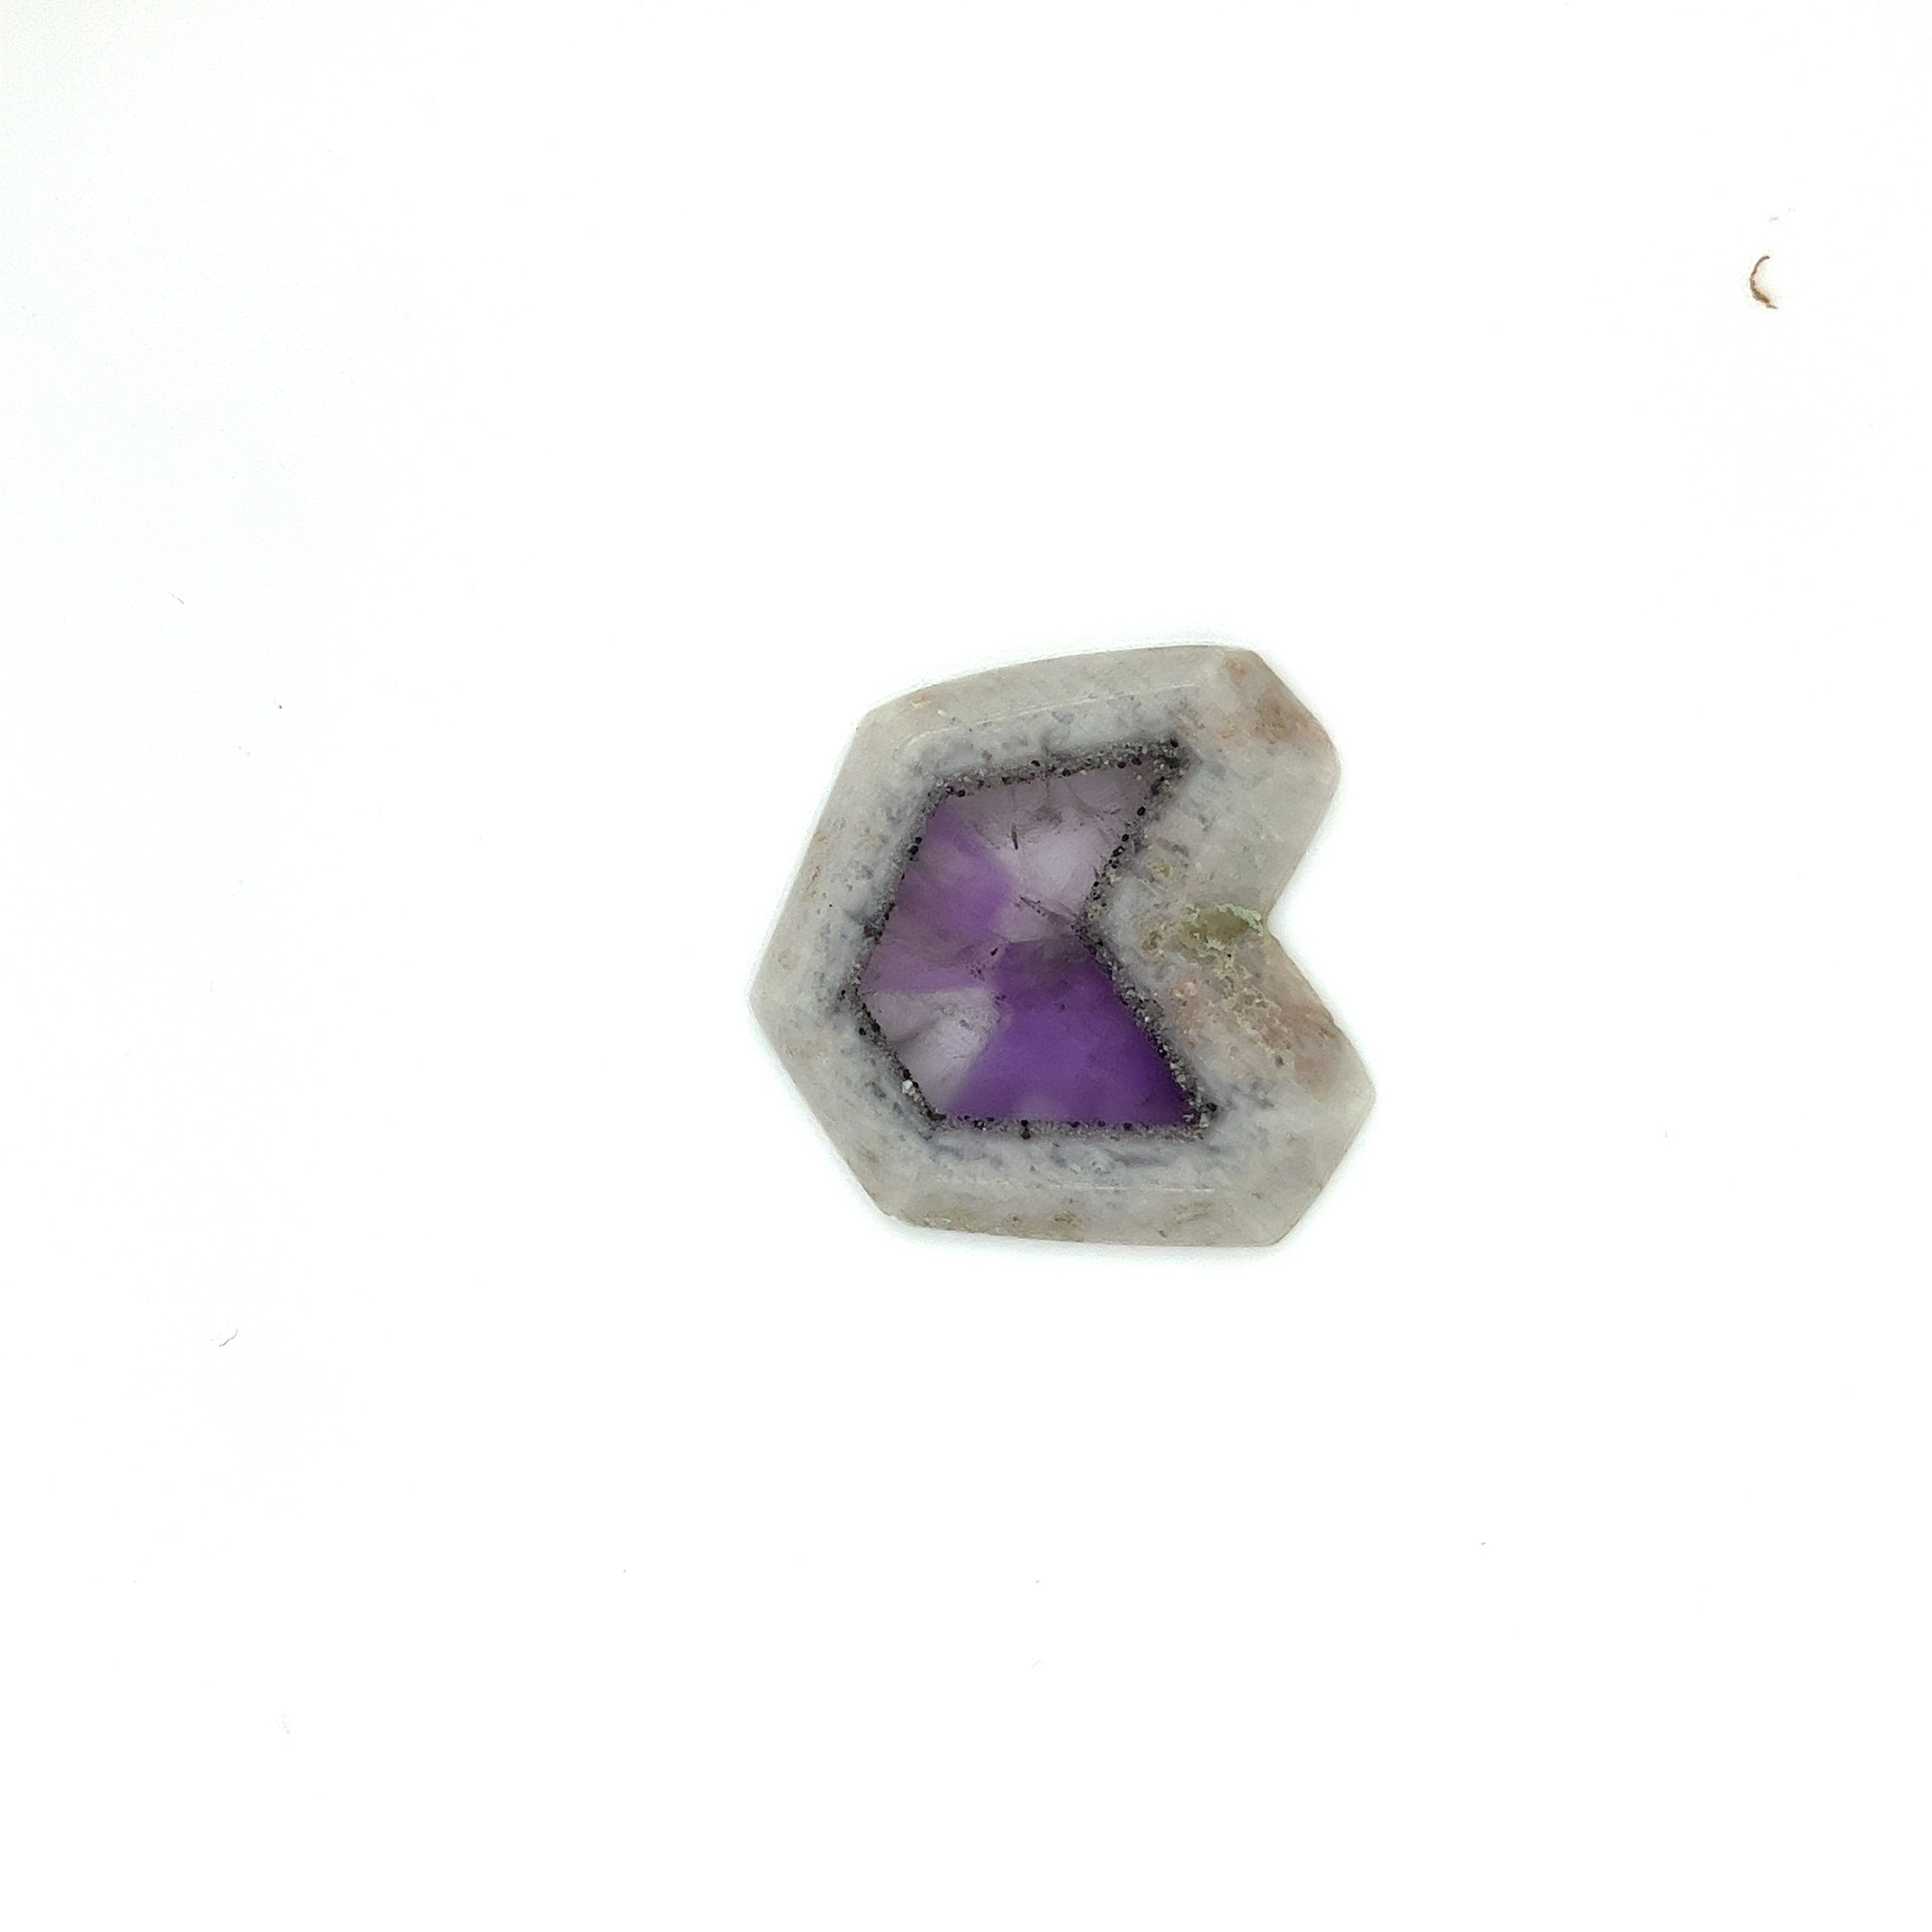 Trapiche Amethyst; Natural Untreated India Amethyst Slice, 8grams - Mark Oliver Gems